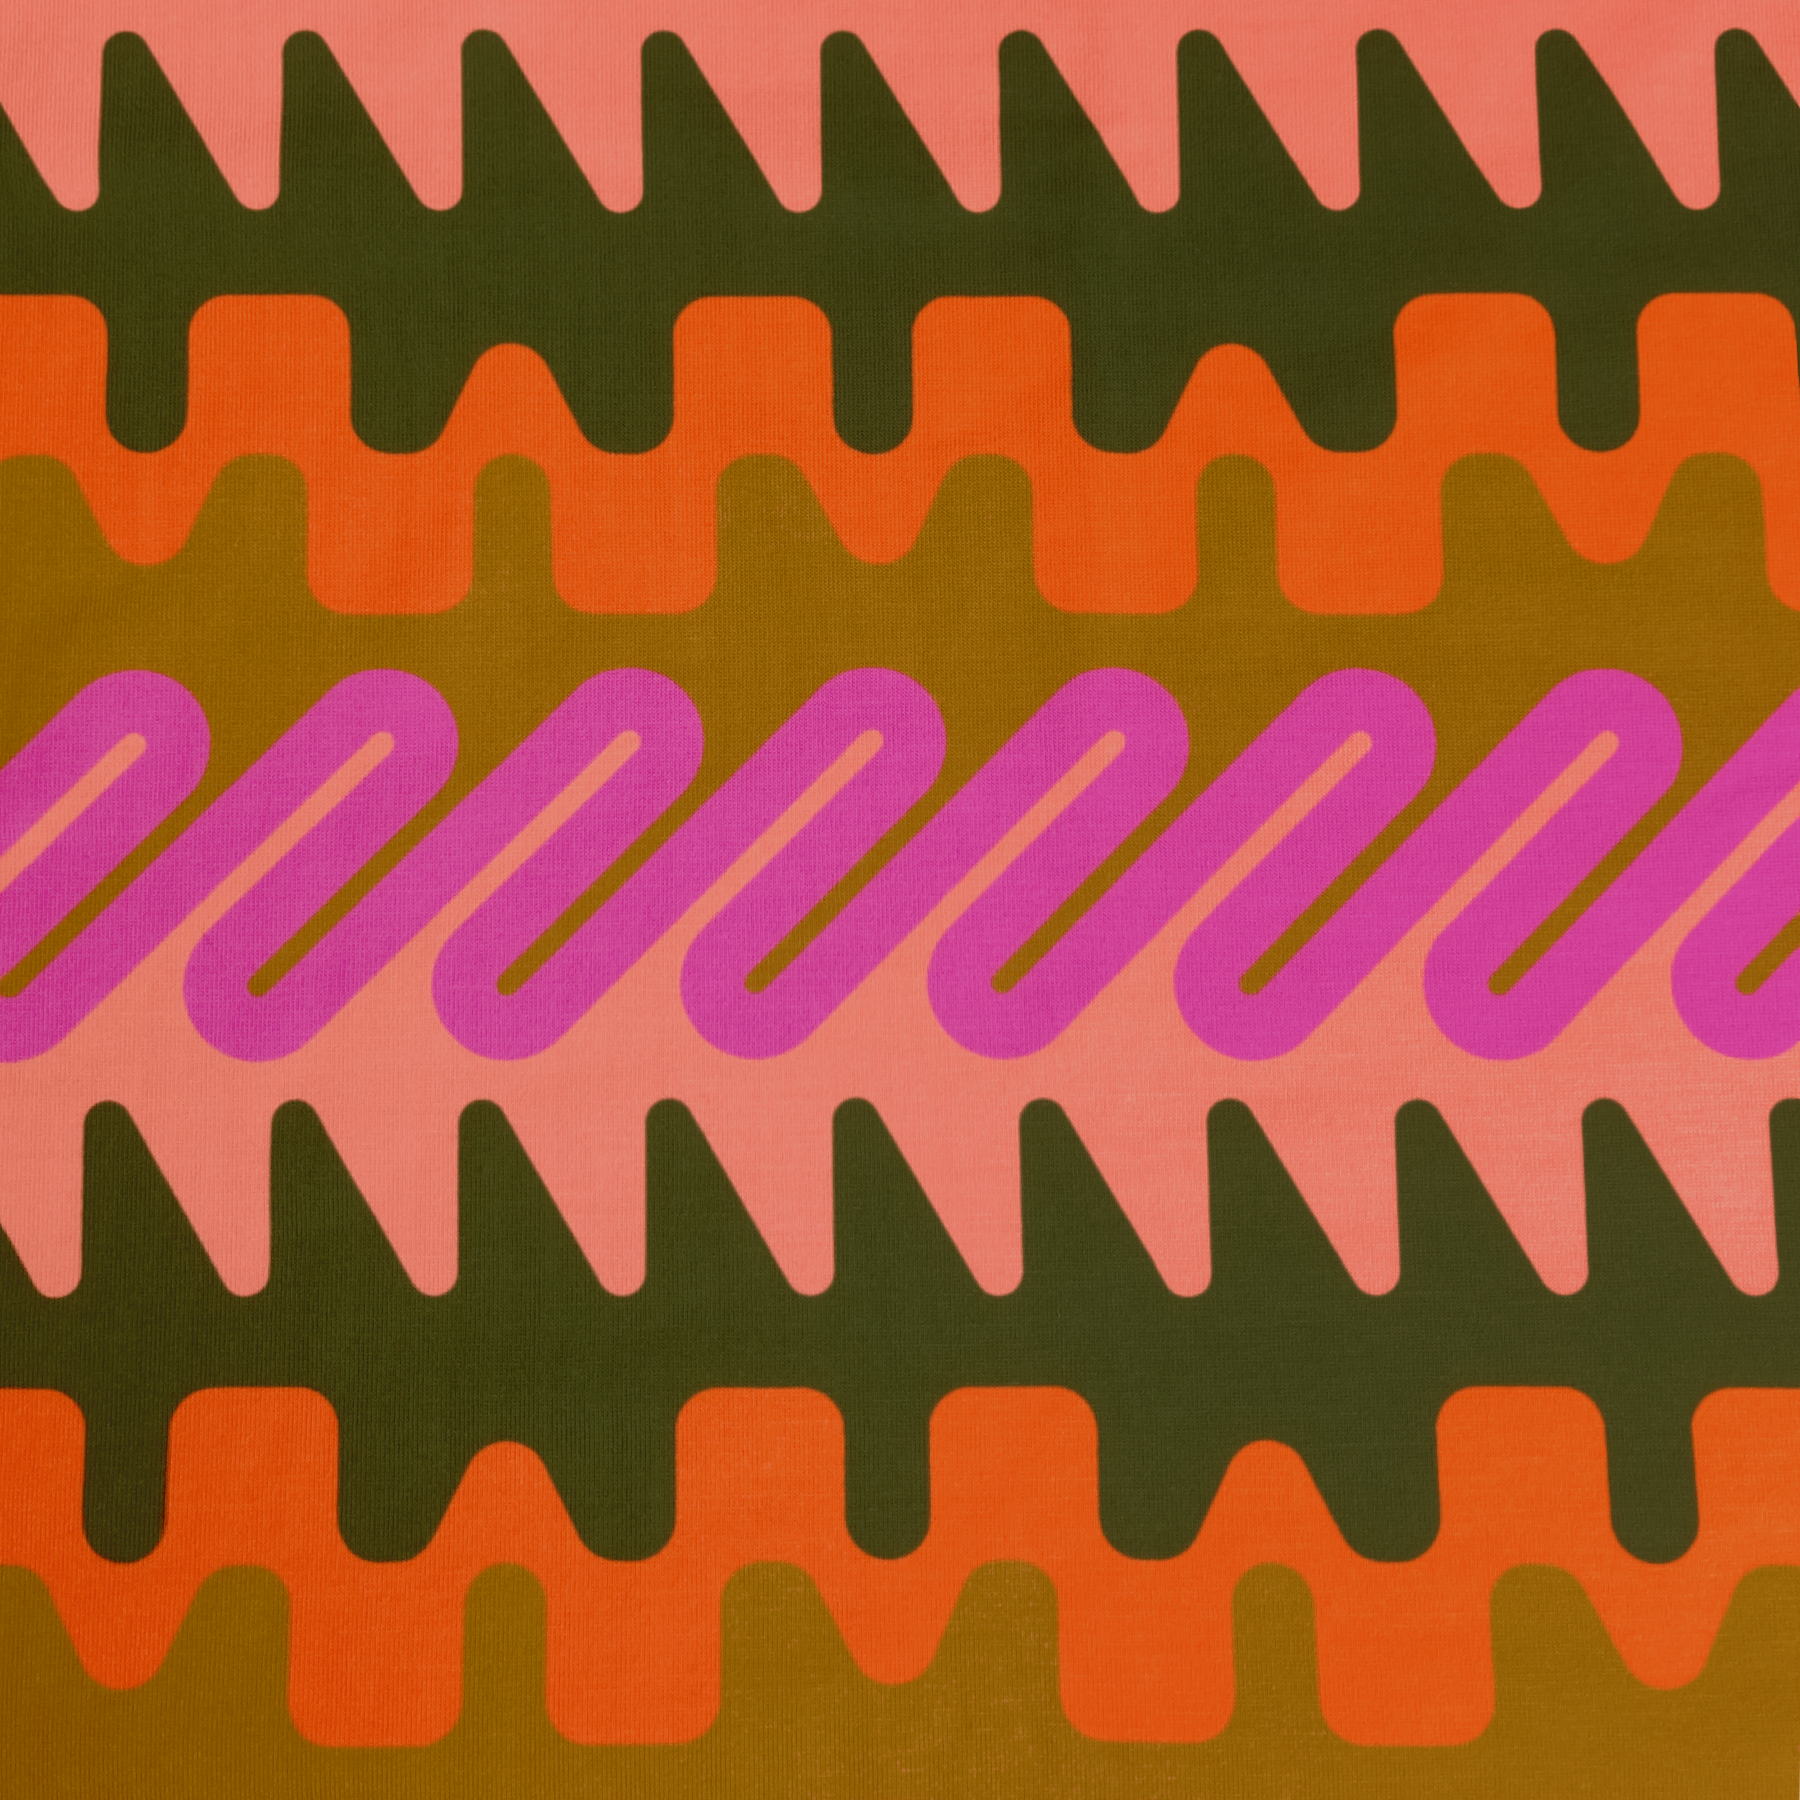 Frequencies (key pattern) in Neon Earth Tones- 70s groovy, chunky frequency waves colorblocked in forest green, pea green, blush pink, bright fuchsia, and hunter orange.